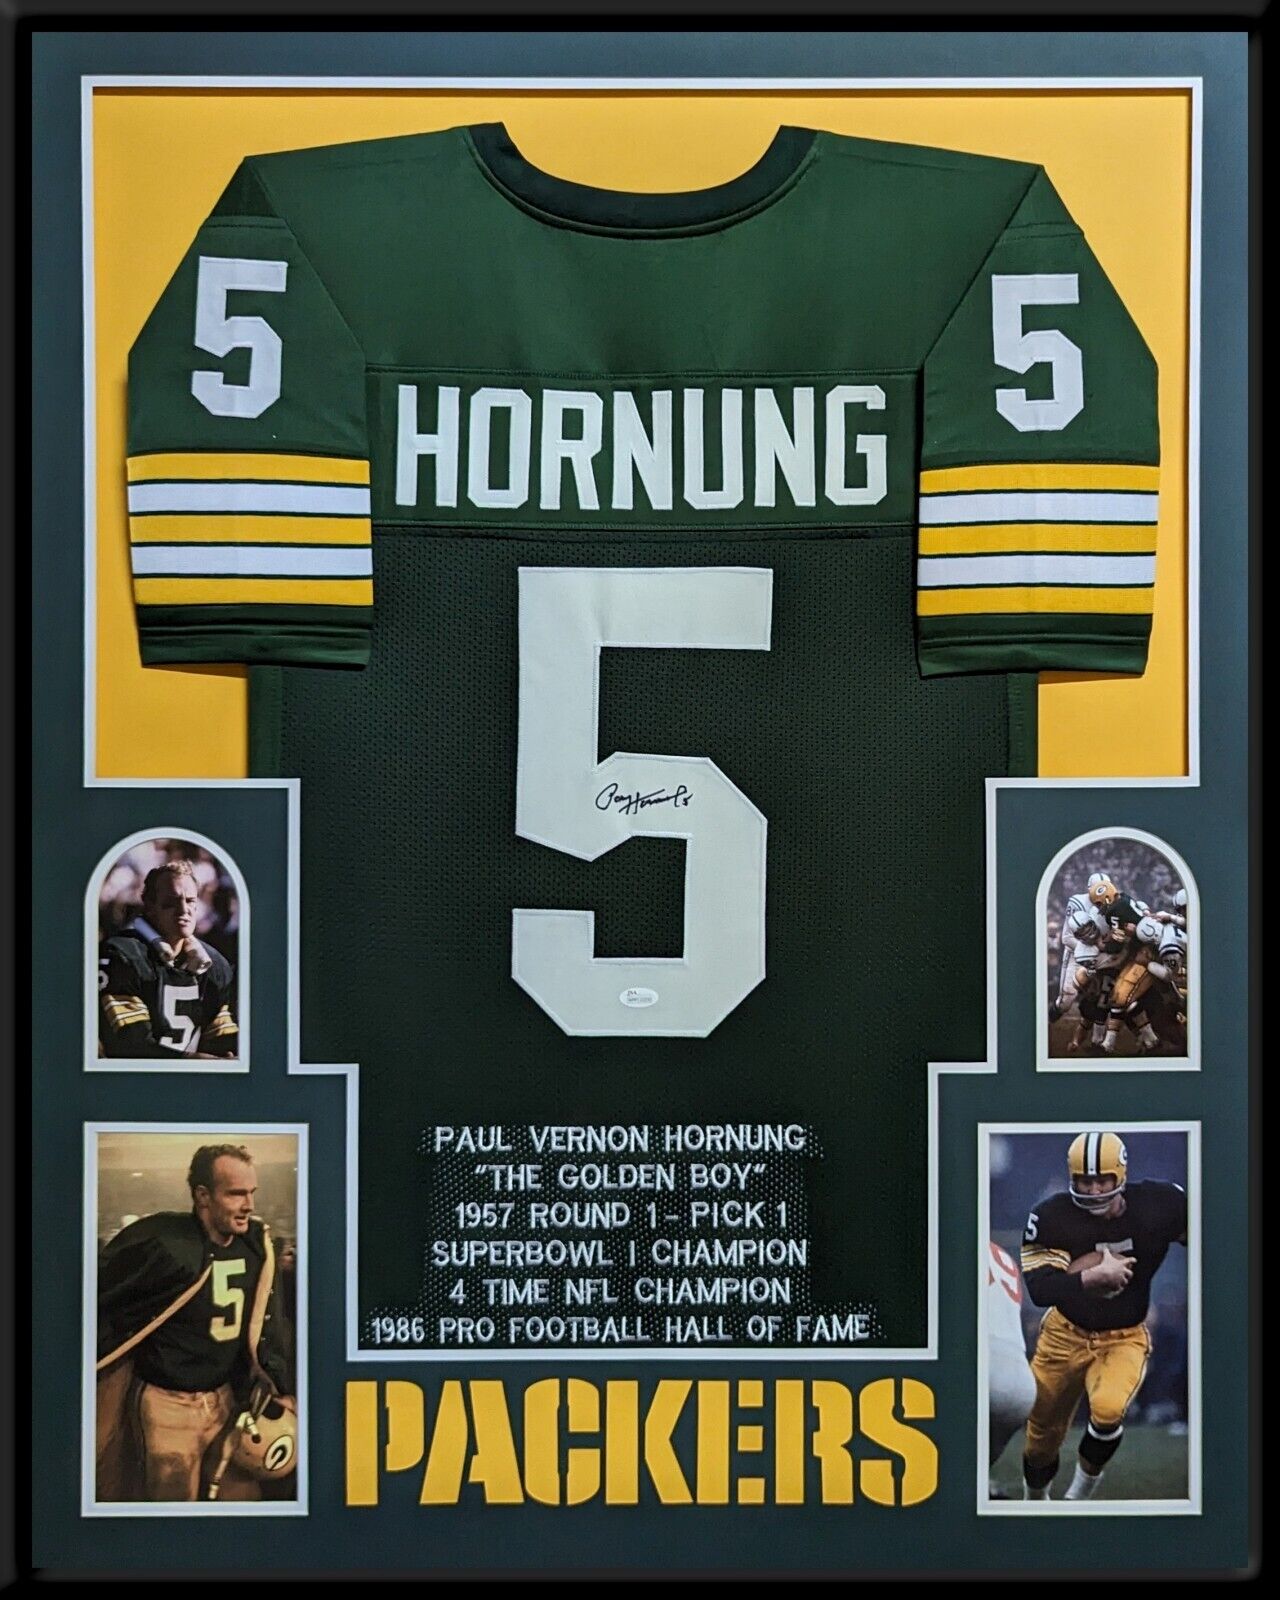 MVP Authentics Framed Paul Hornung Autographed Signed Green Bay Packers Stat Jersey Jsa Coa 517.50 sports jersey framing , jersey framing